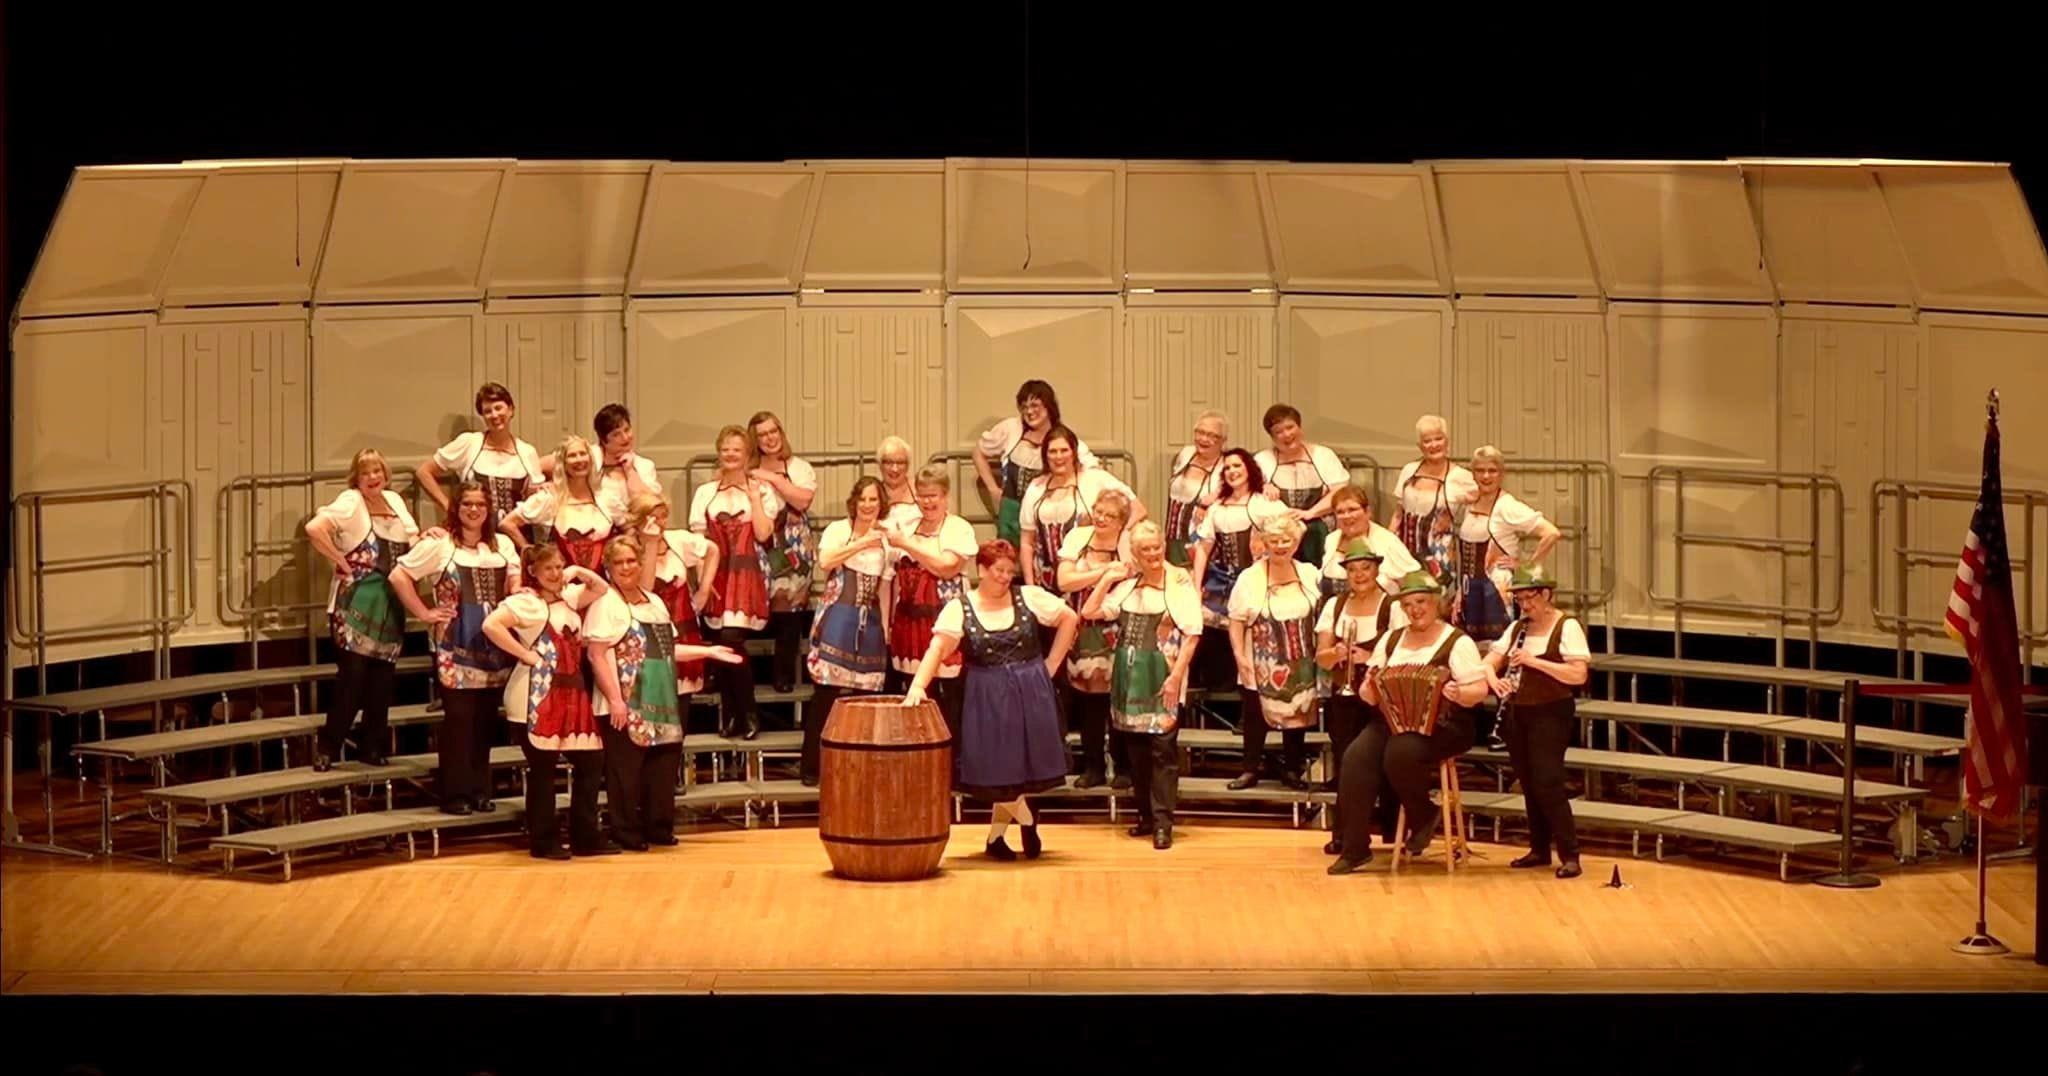 Fox Valley Chorus wins first place at Sweet Adeline regional competition, and more Oshkosh news in brief